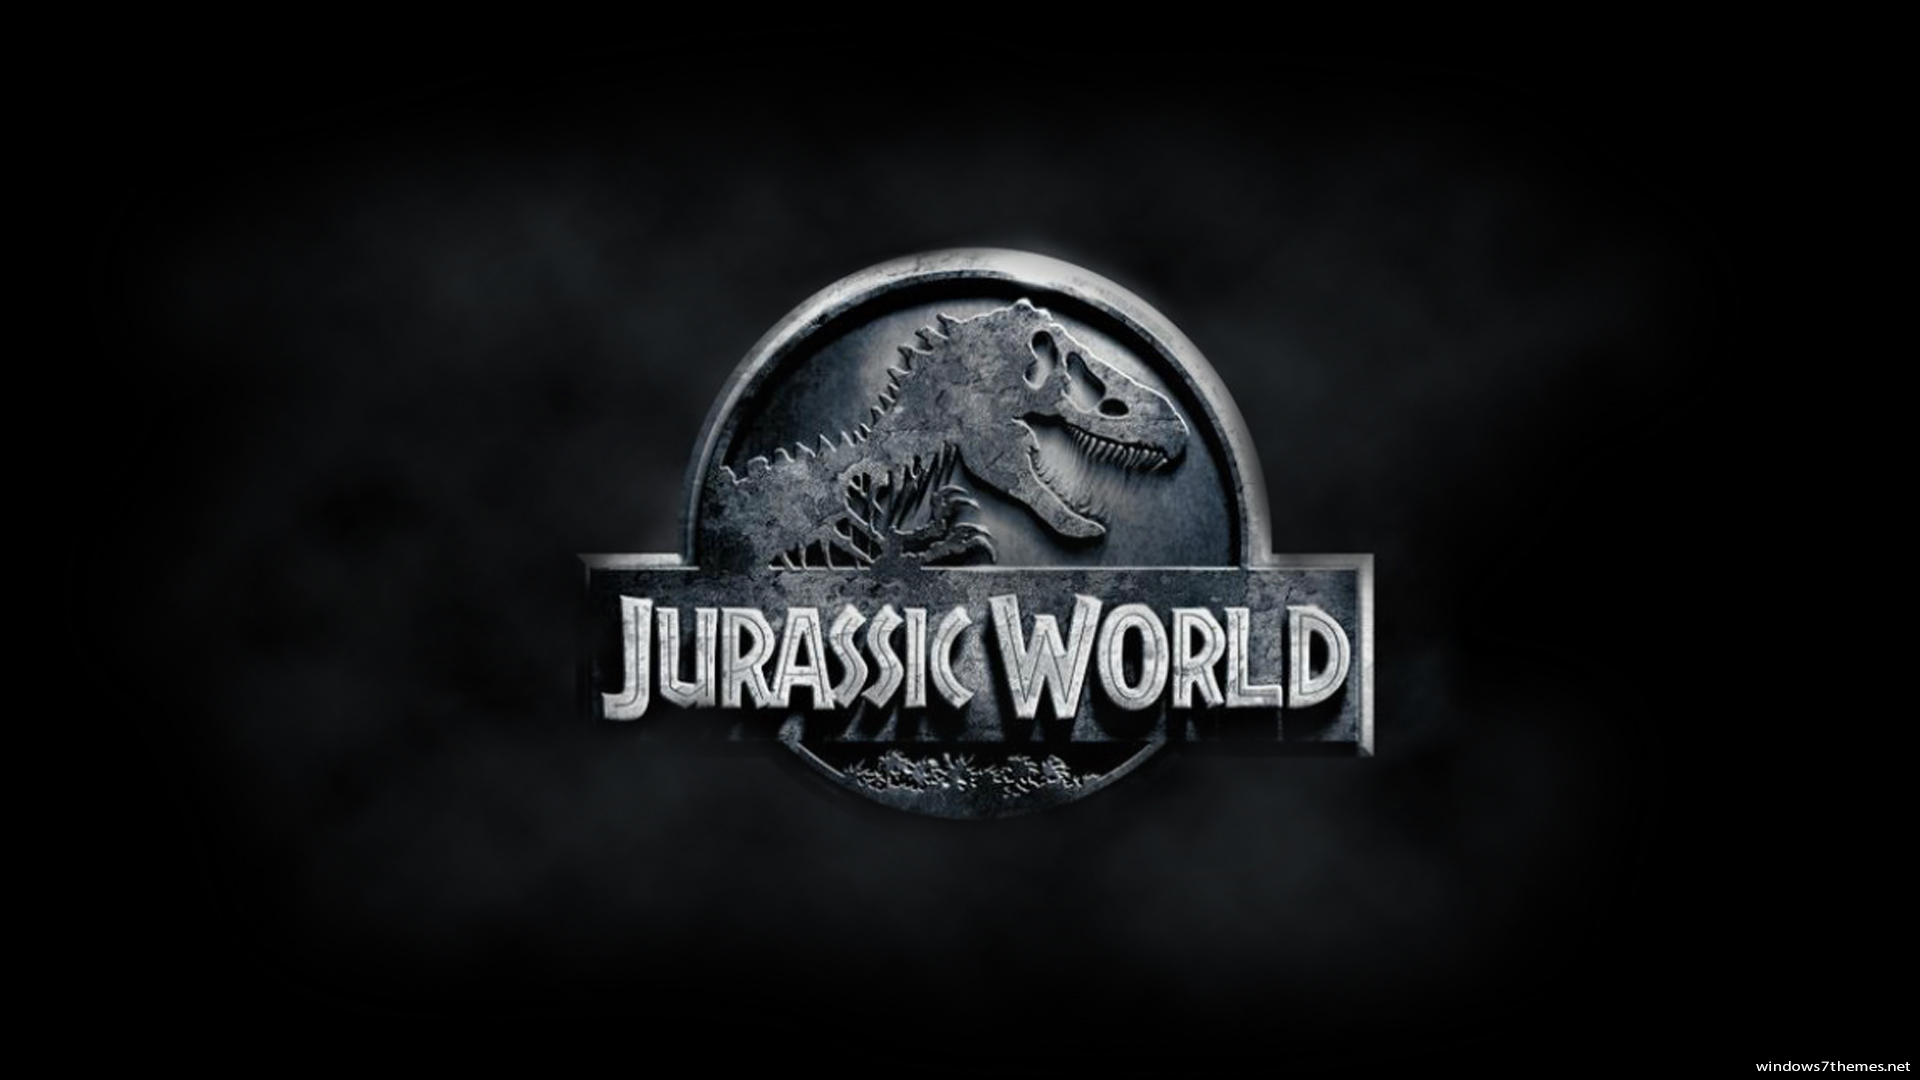 Movie Jurassic World Jurassic Park HD Wallpaper Print Poster 2 Print  Poster on LARGE PRINT 36X24 INCHES Photographic Paper  Nature posters in  India  Buy art film design movie music nature